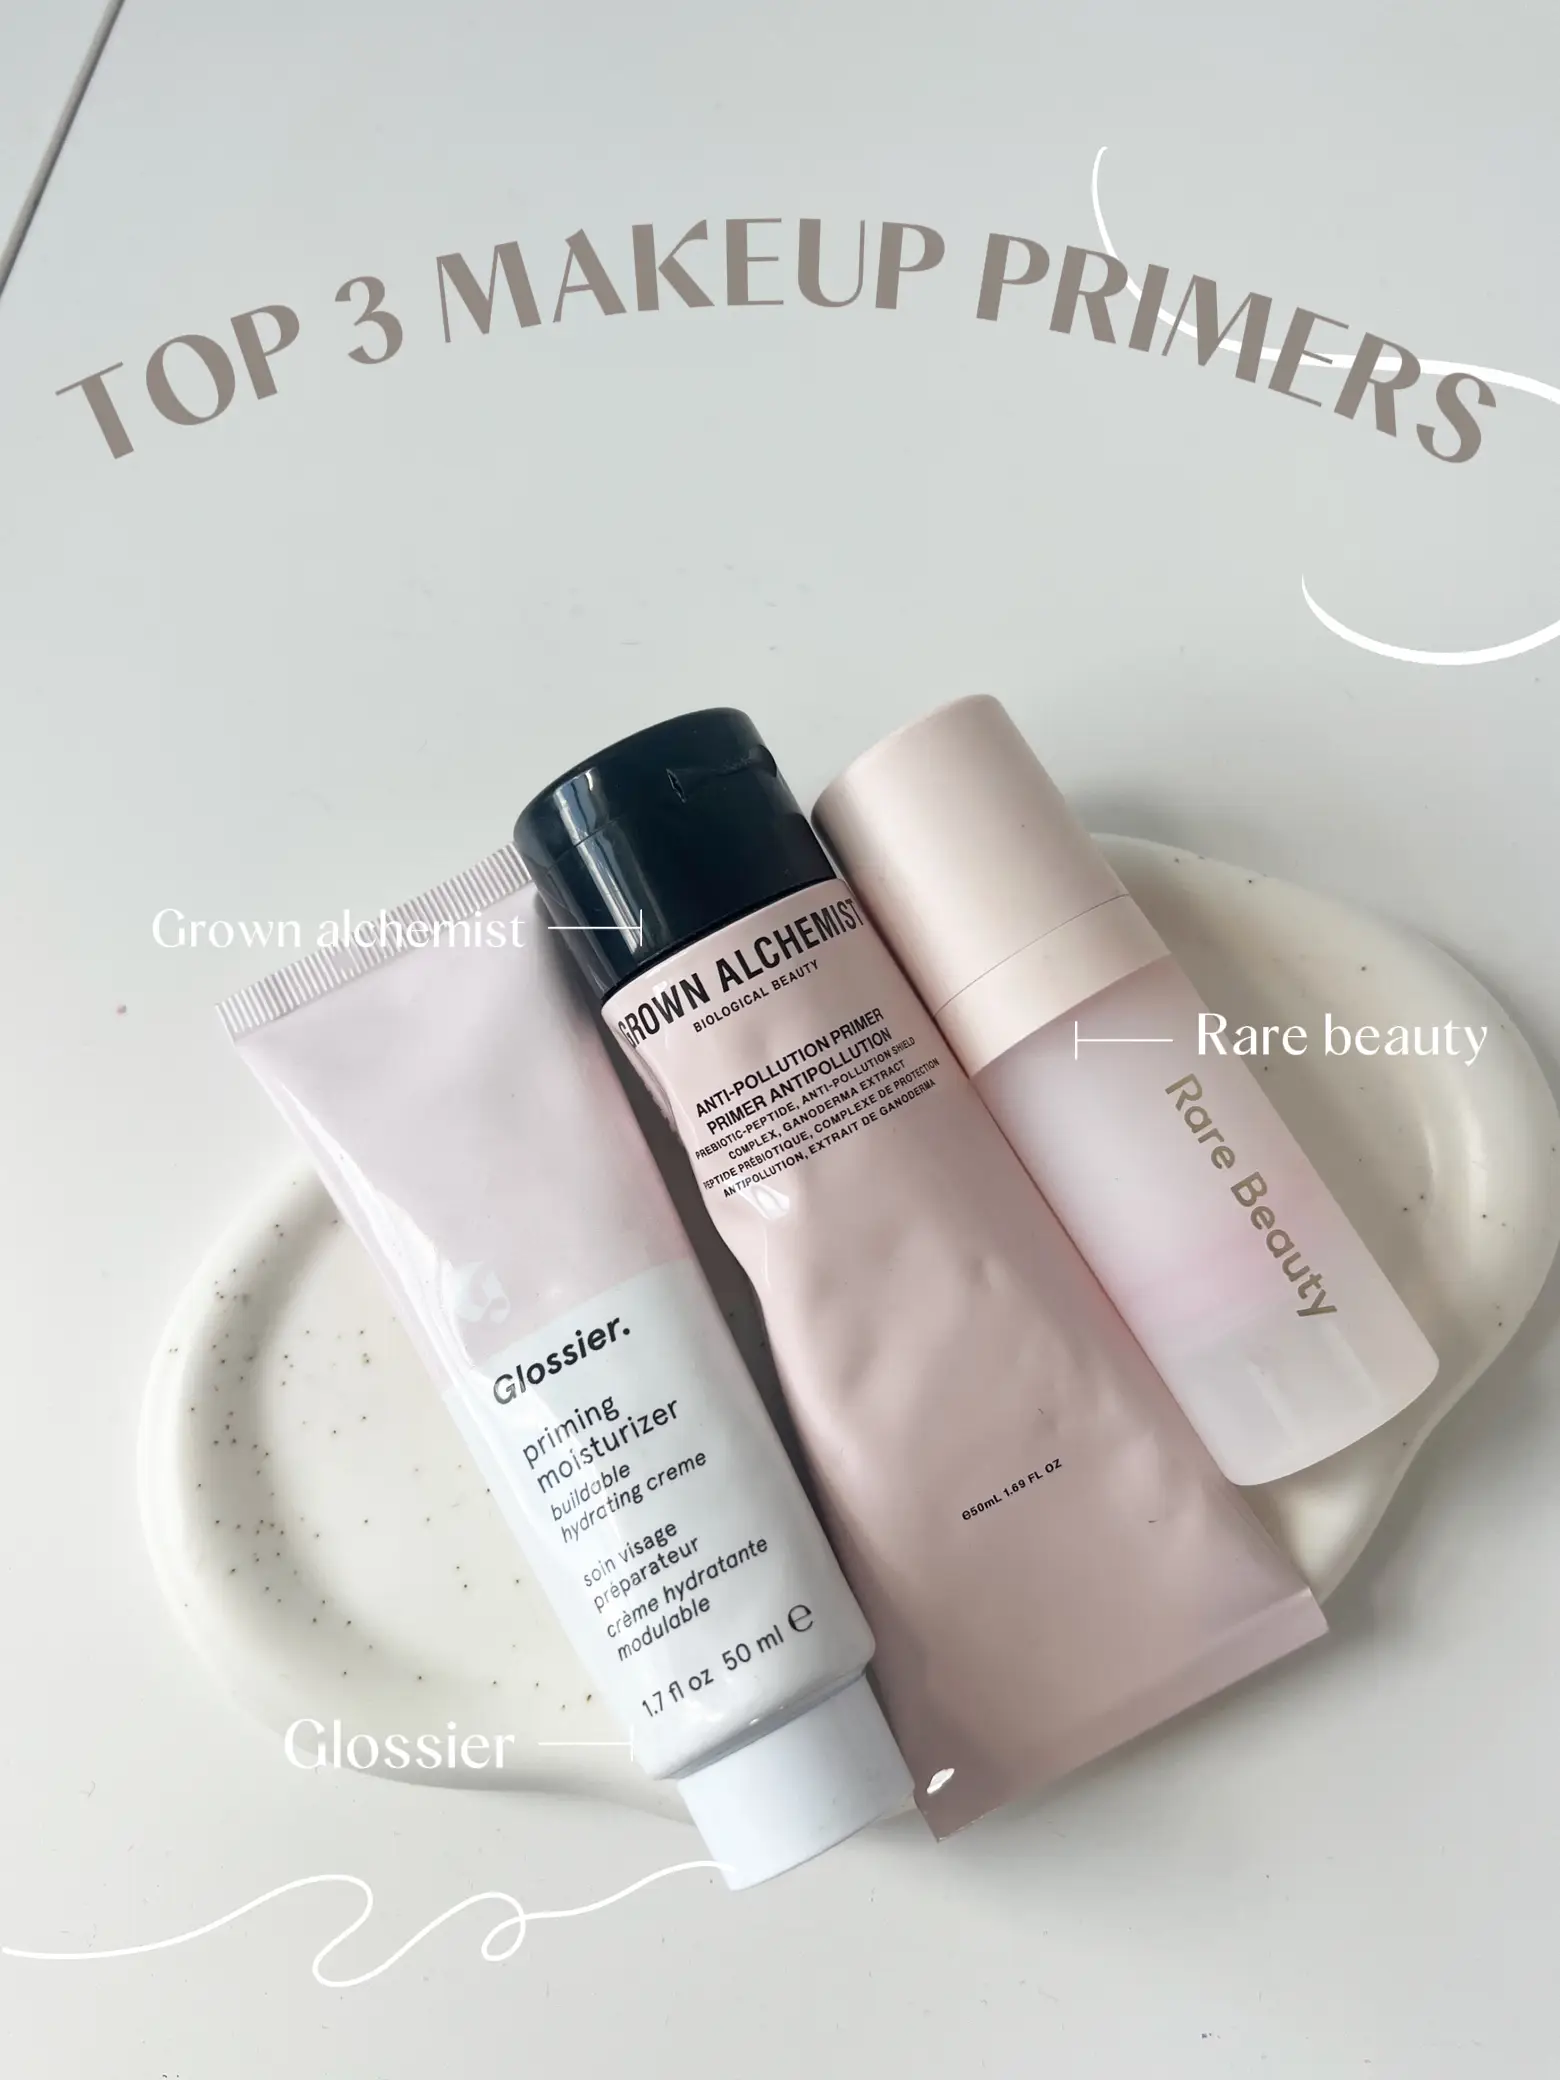 🌟 Makeup Primer 🌟 Must-Haves! | | Review: Top 3 by posted Janet Lemon8 Gallery